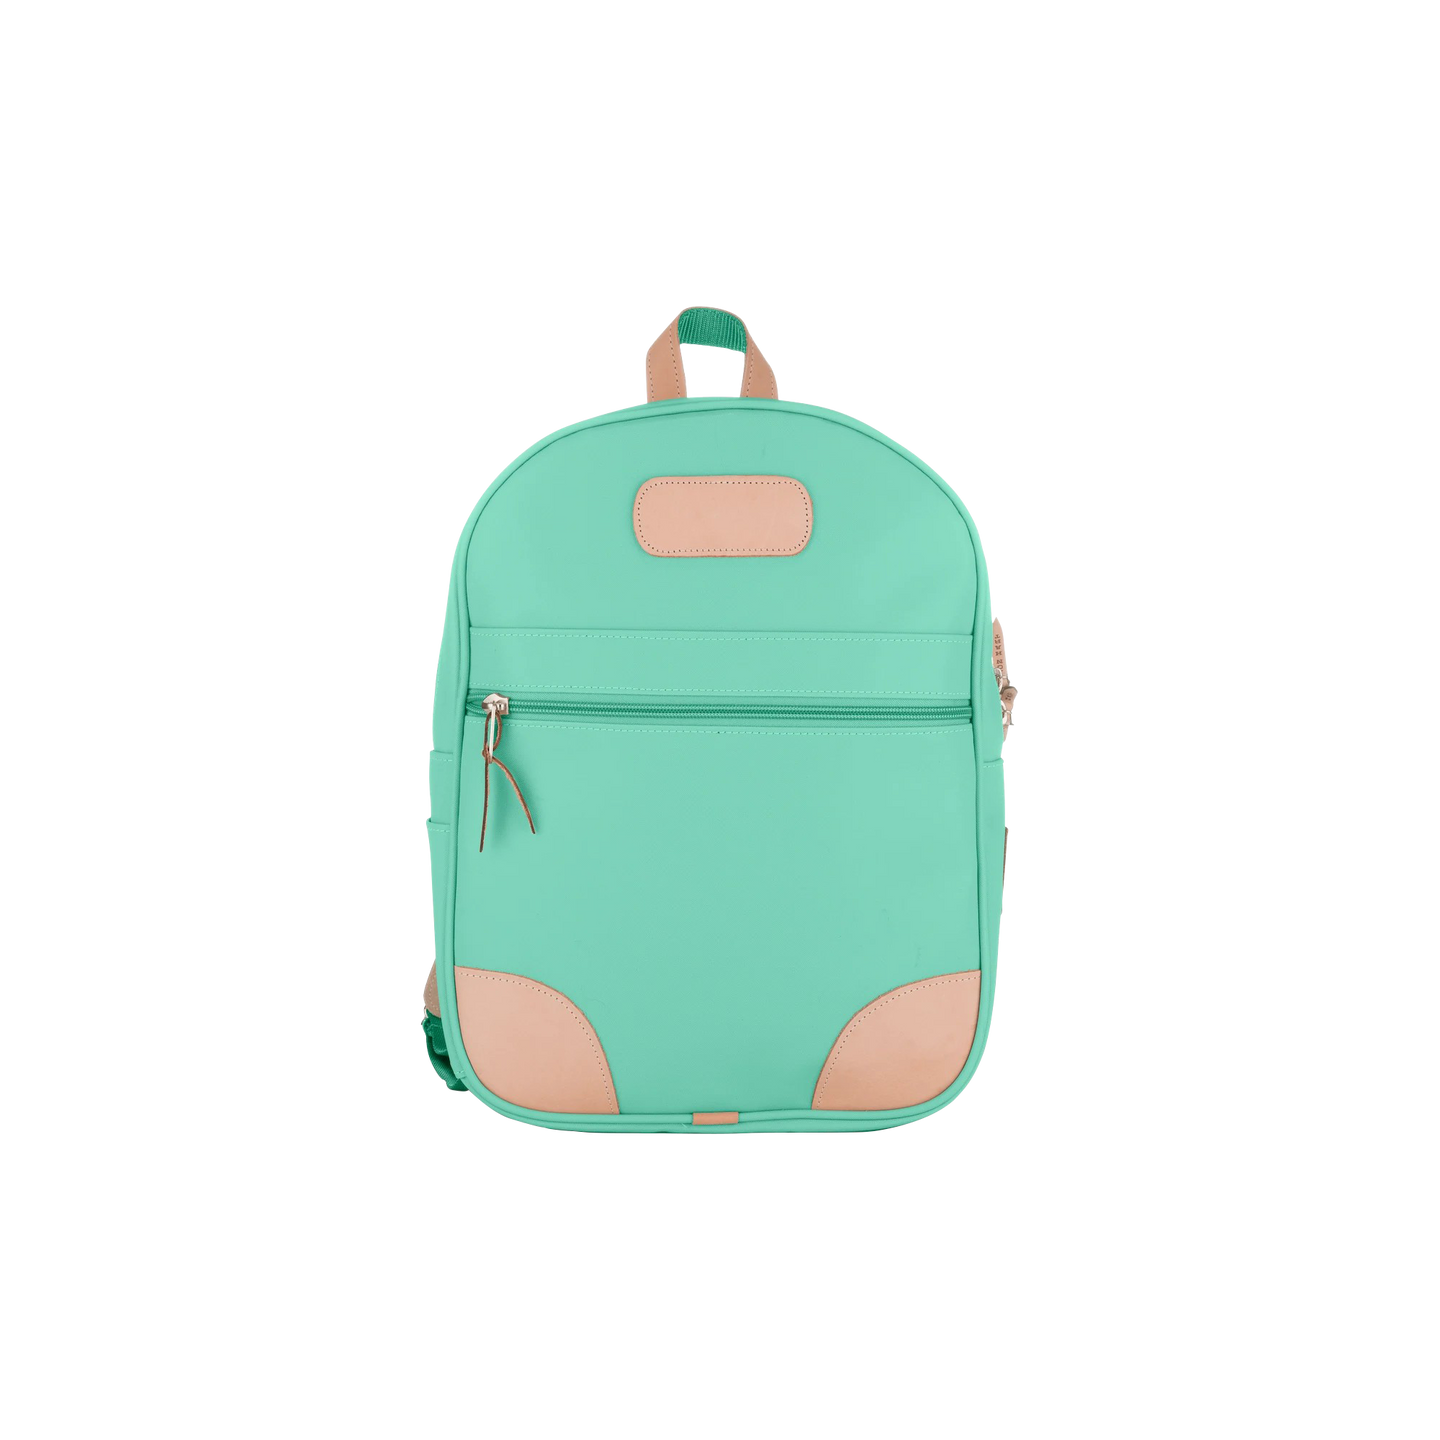 Backpack - Mint Coated Canvas Front Angle in Color 'Mint Coated Canvas'